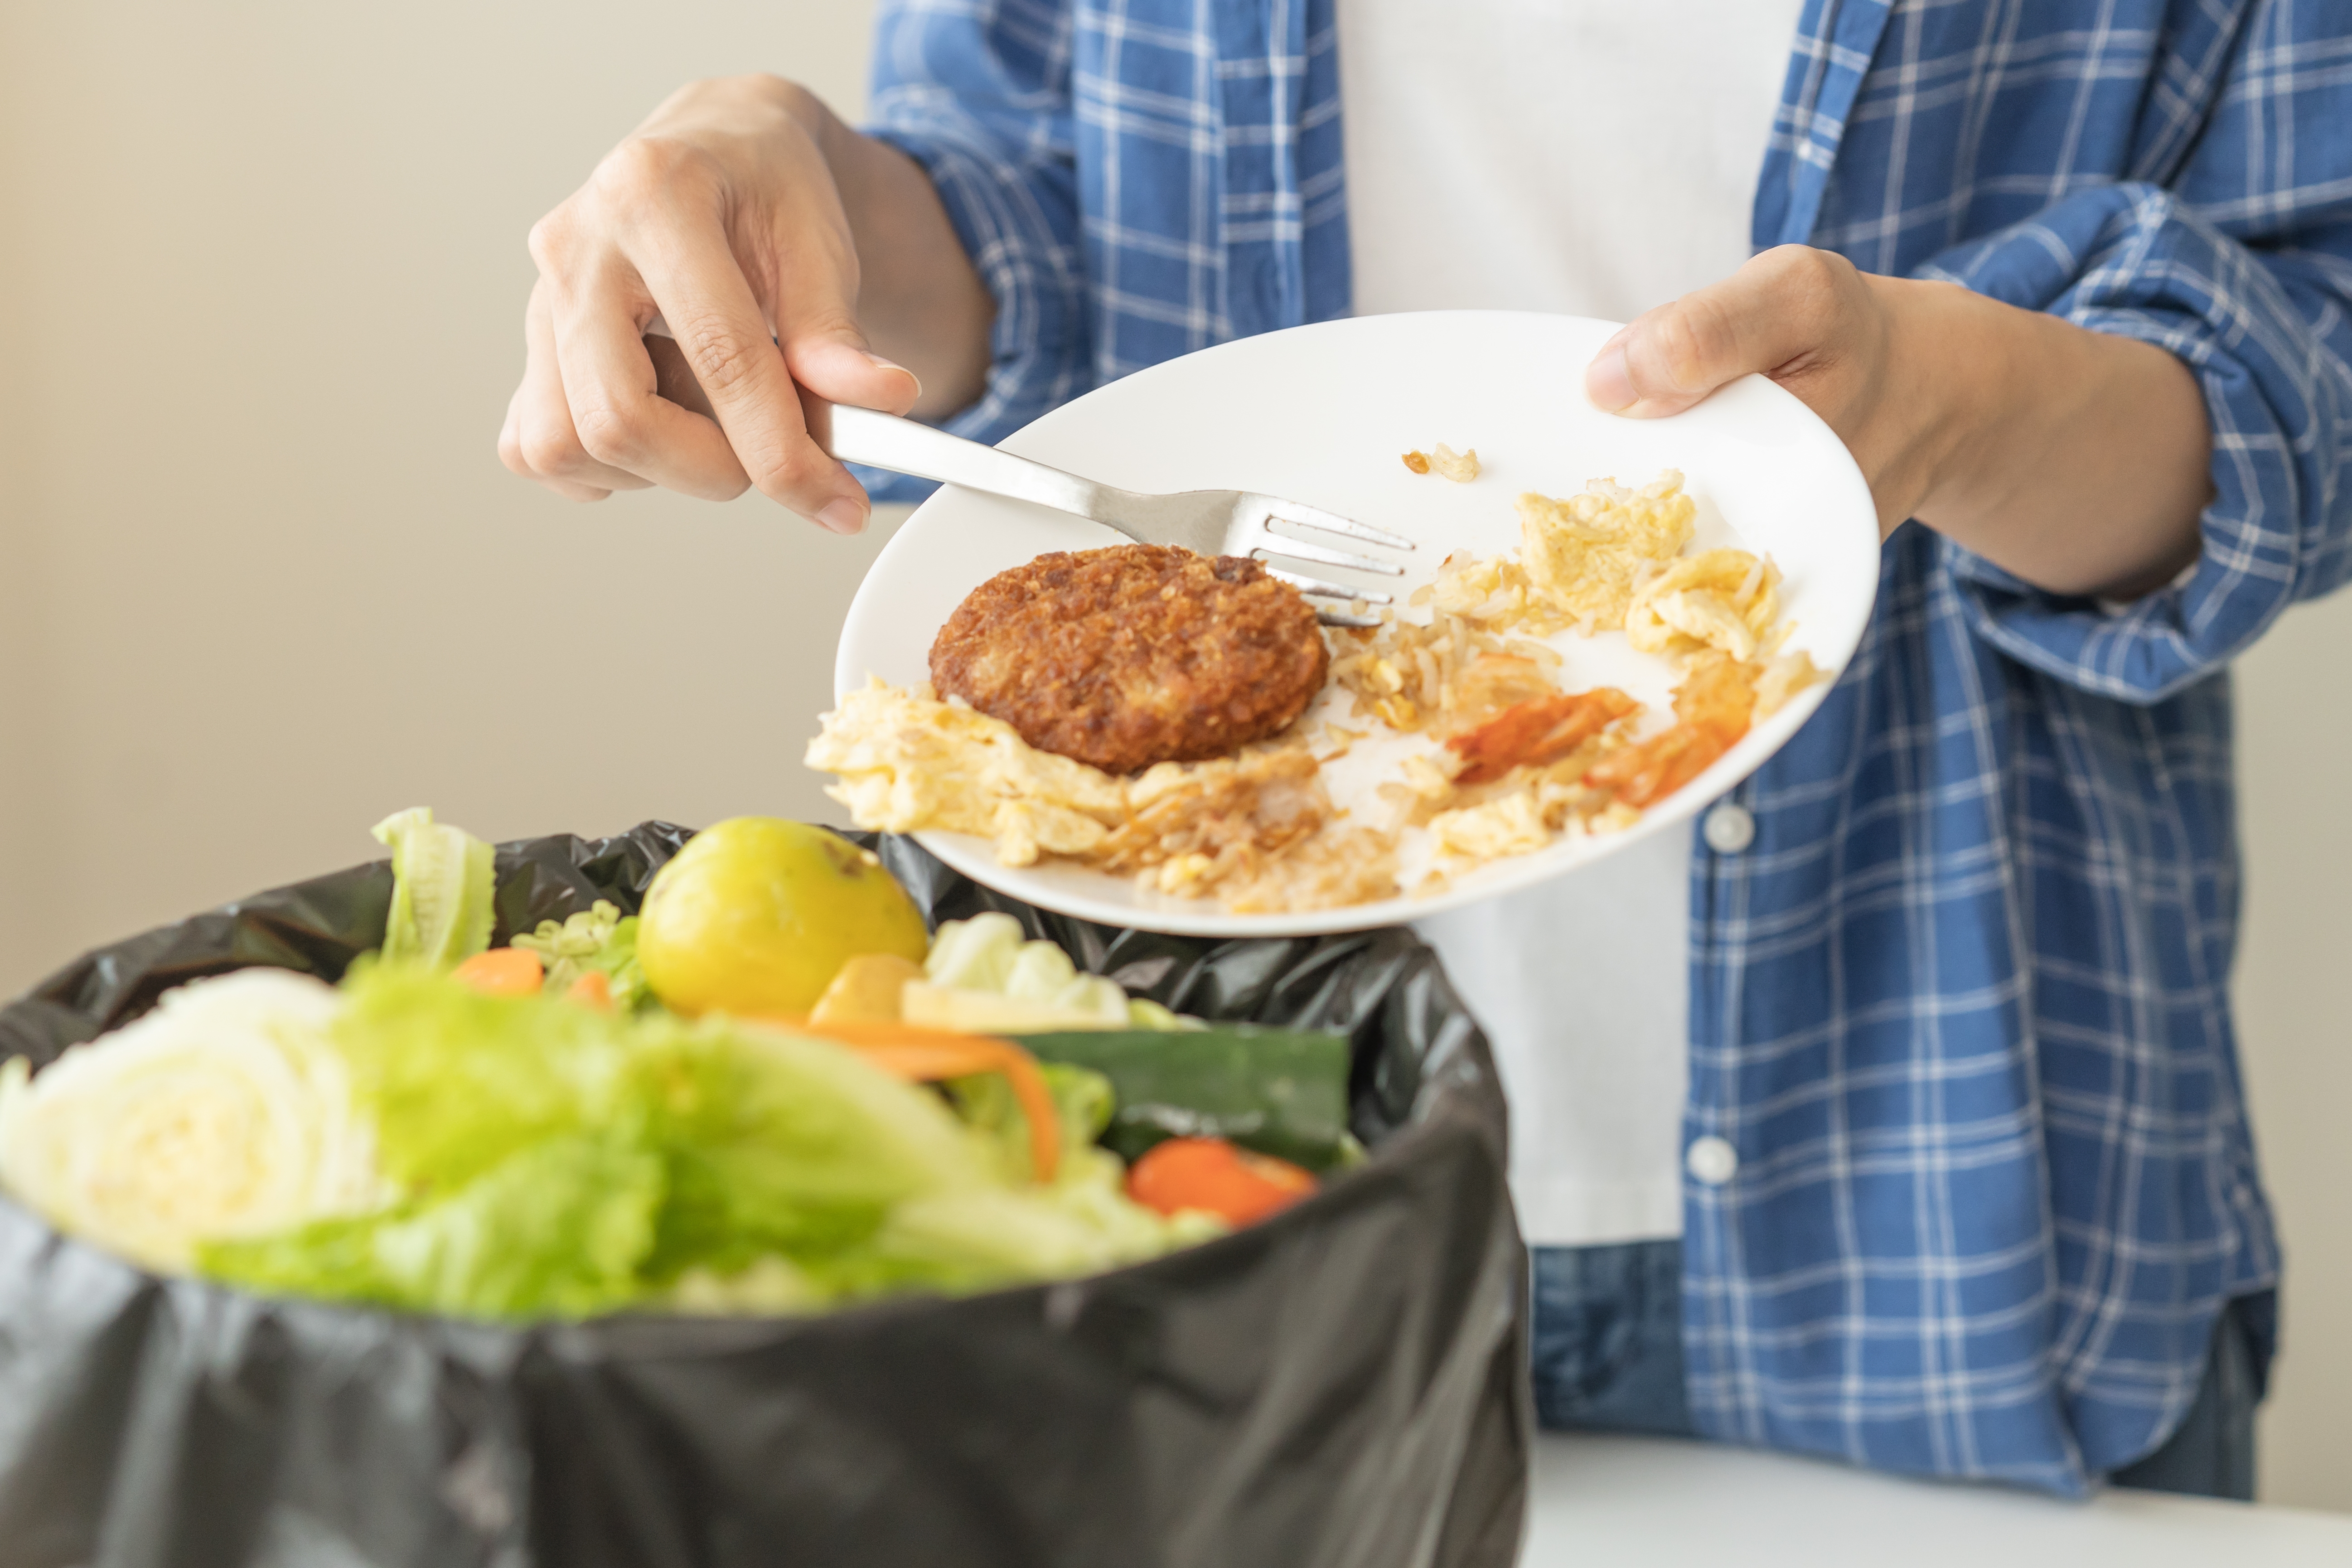 A person discarding food from a plate. | Source: Shutterstock